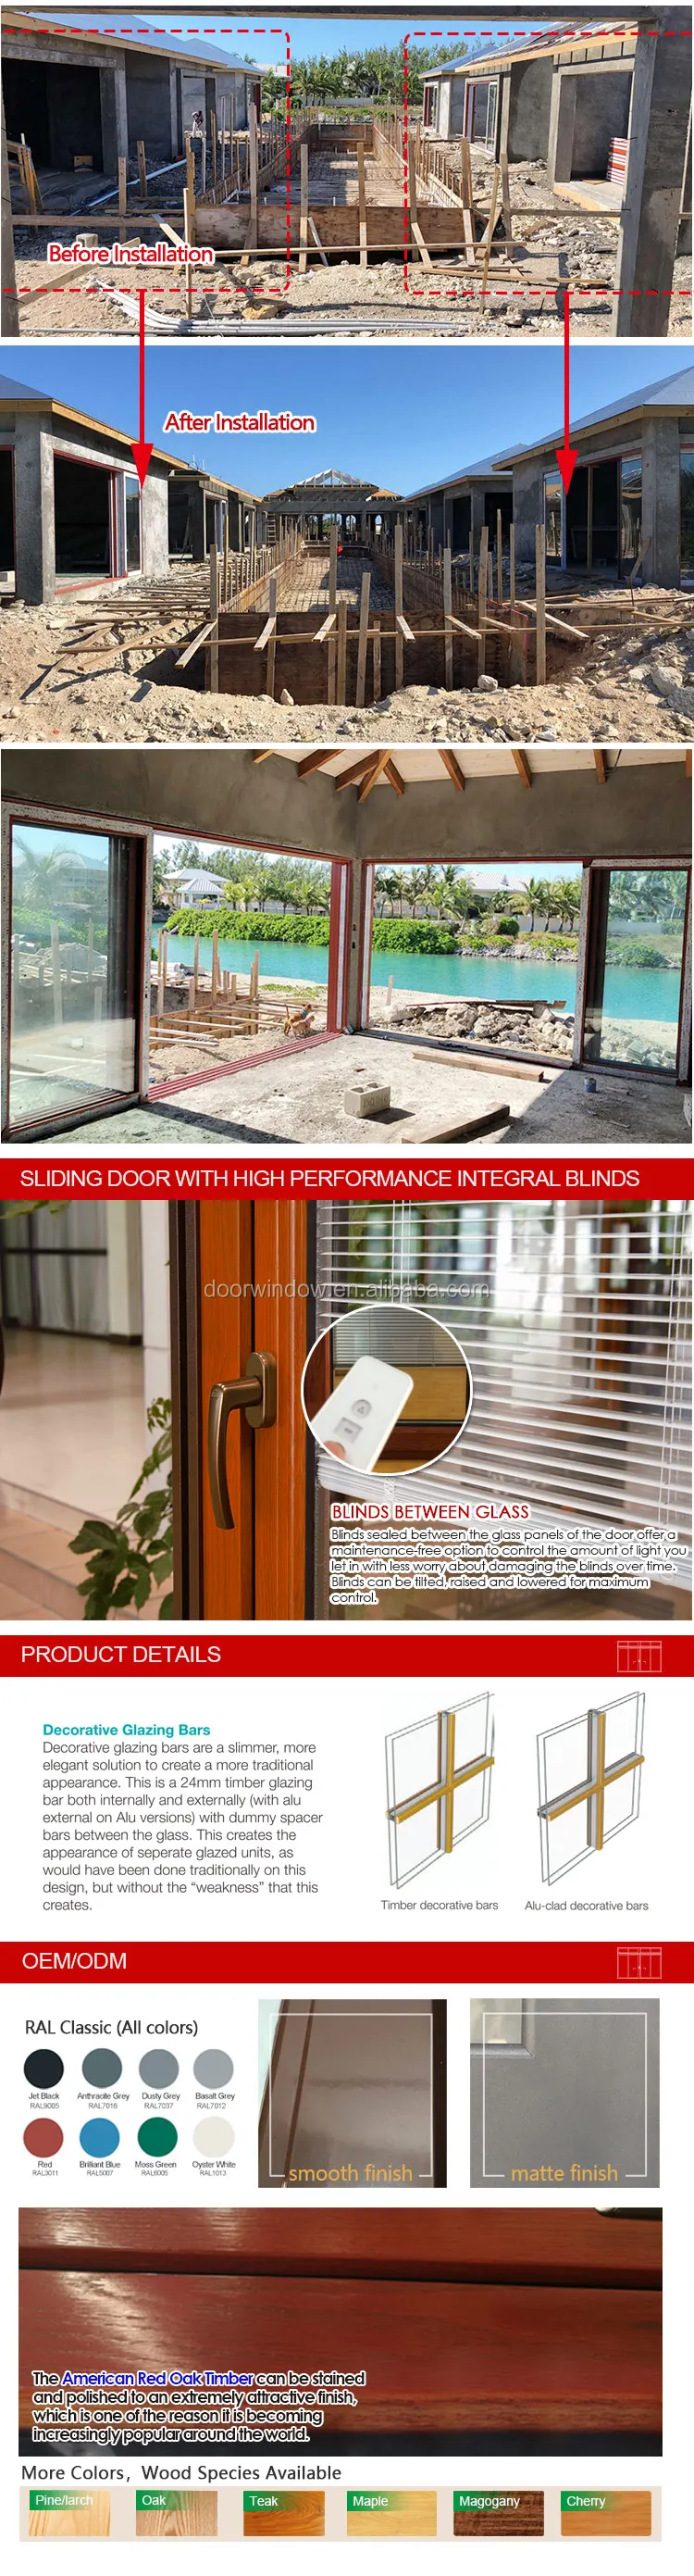 Super wide lift sliding door solid oak with exterior aluminum cladding sliding door system from China brand